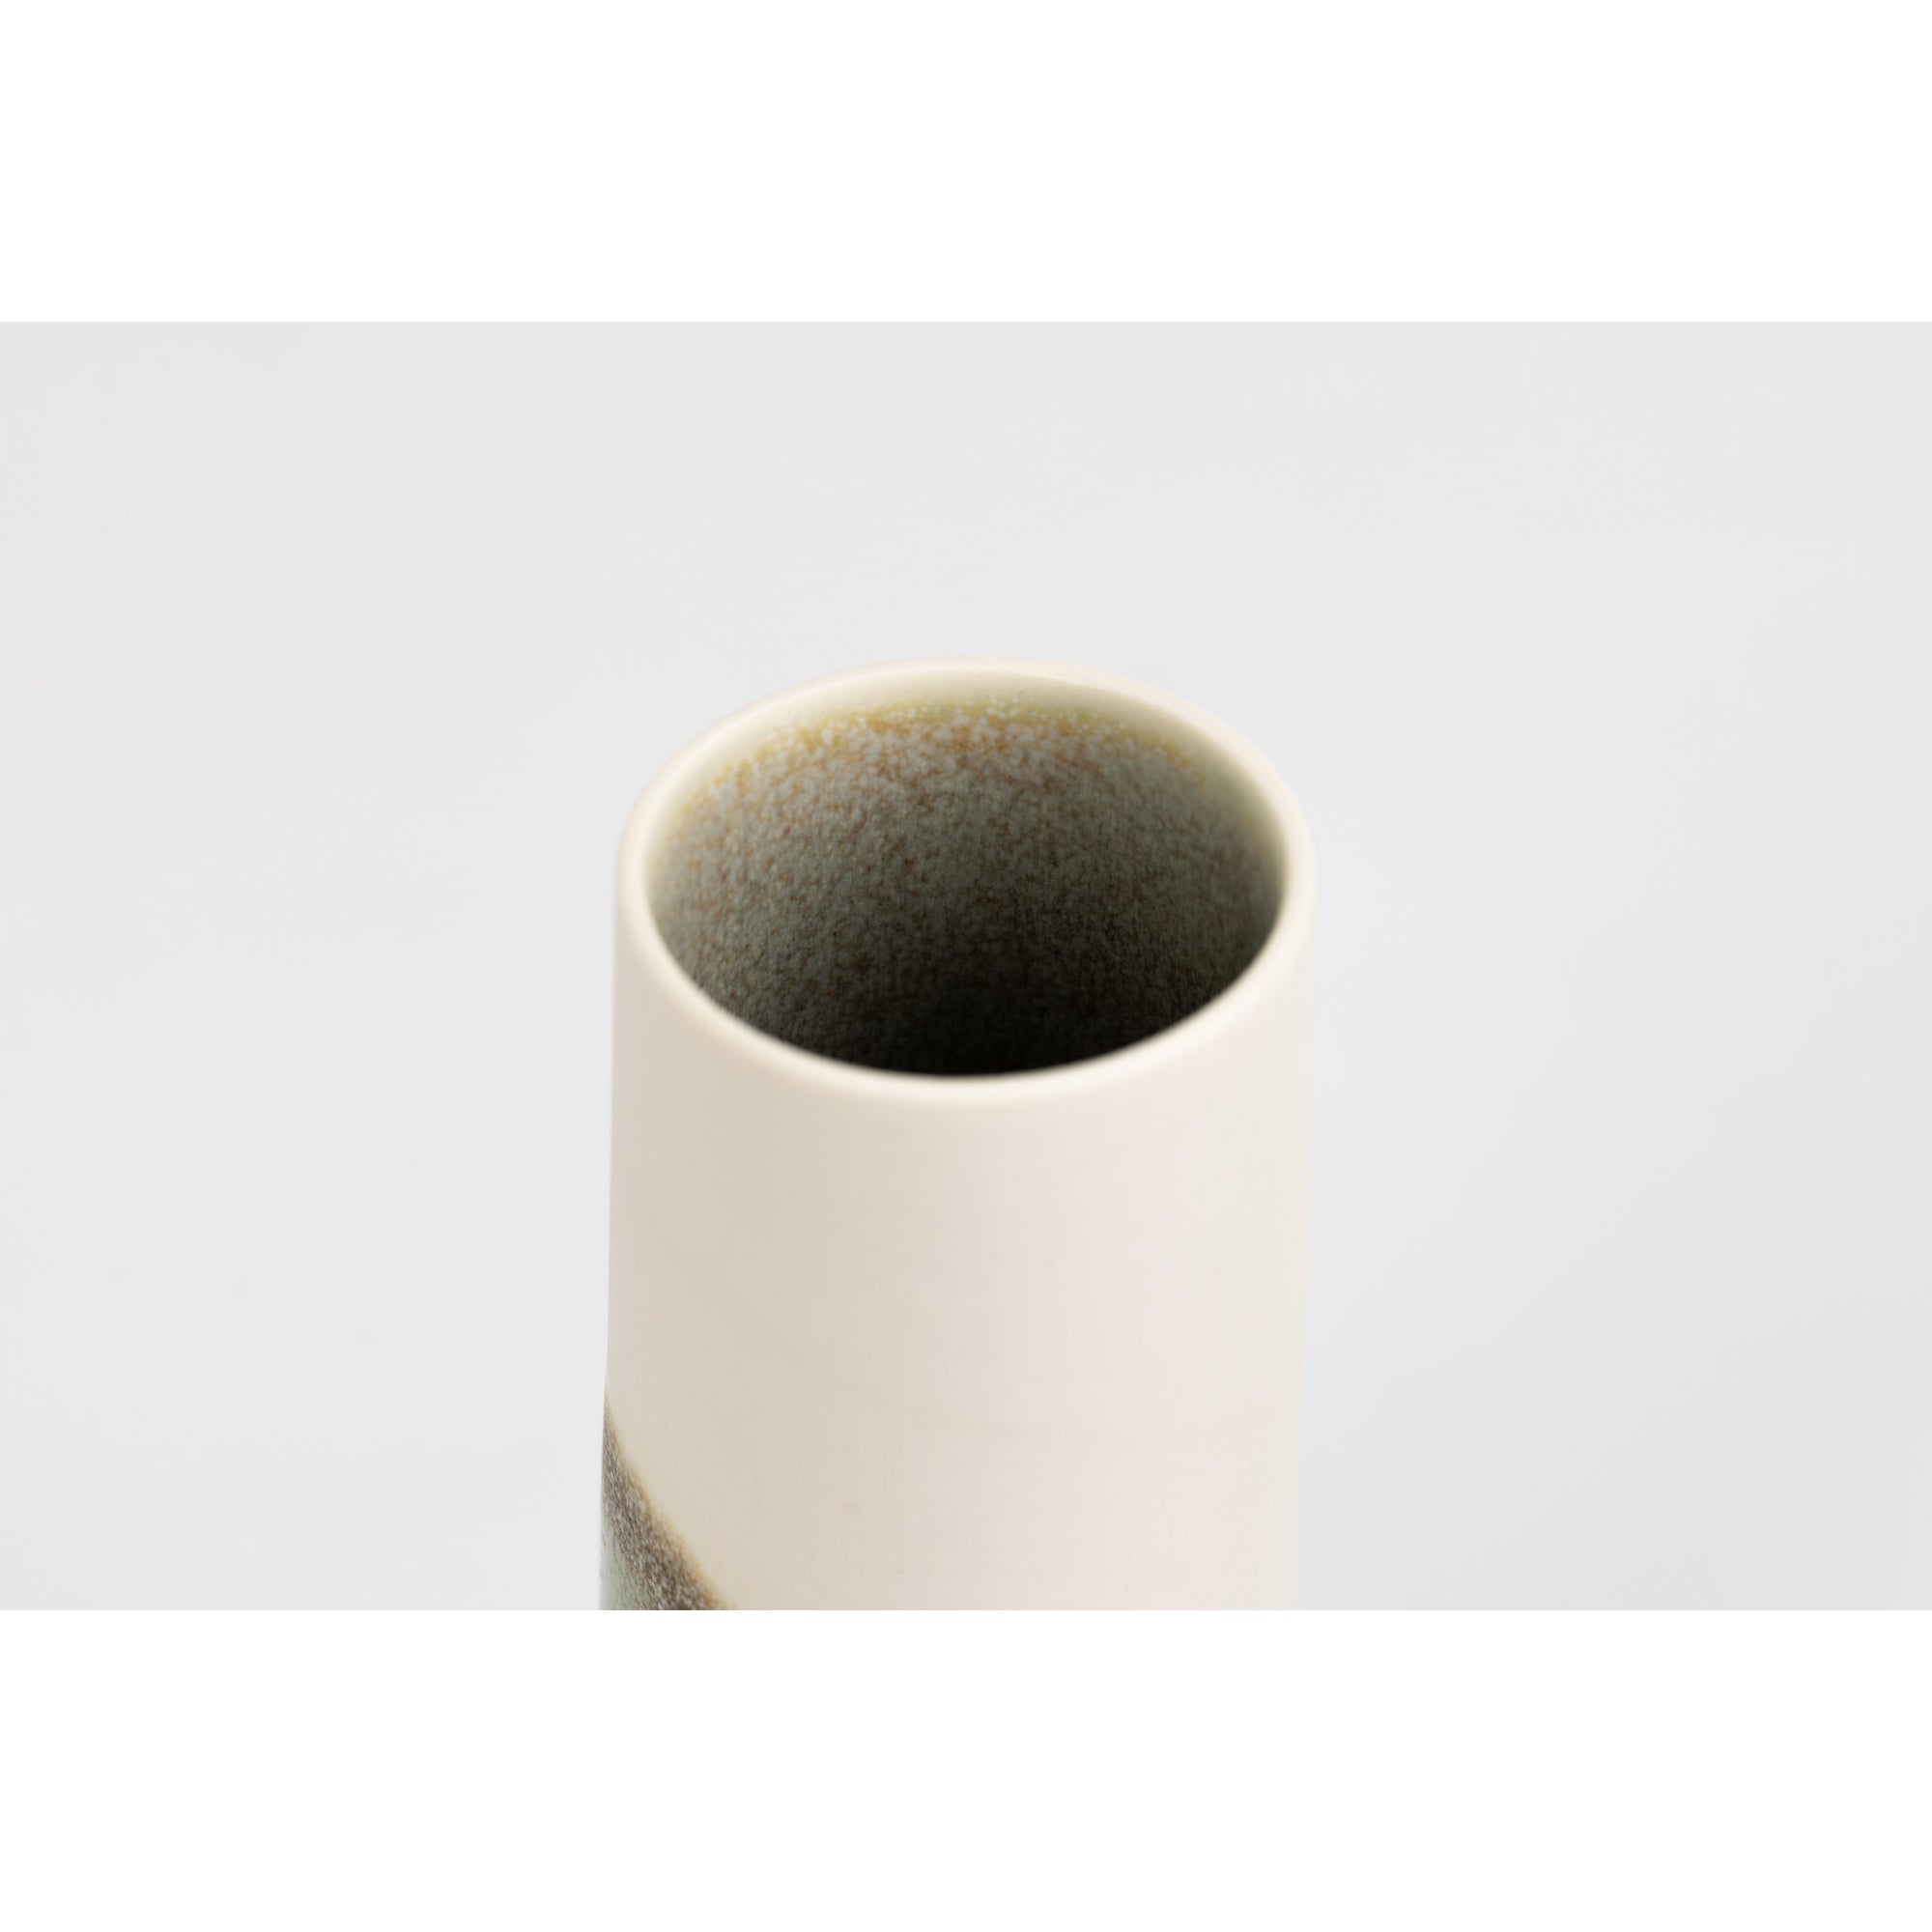 KSN2 South Downs II, Tapered Vessel by Kate Schuricht, available at Padstow Gallery, Cornwall